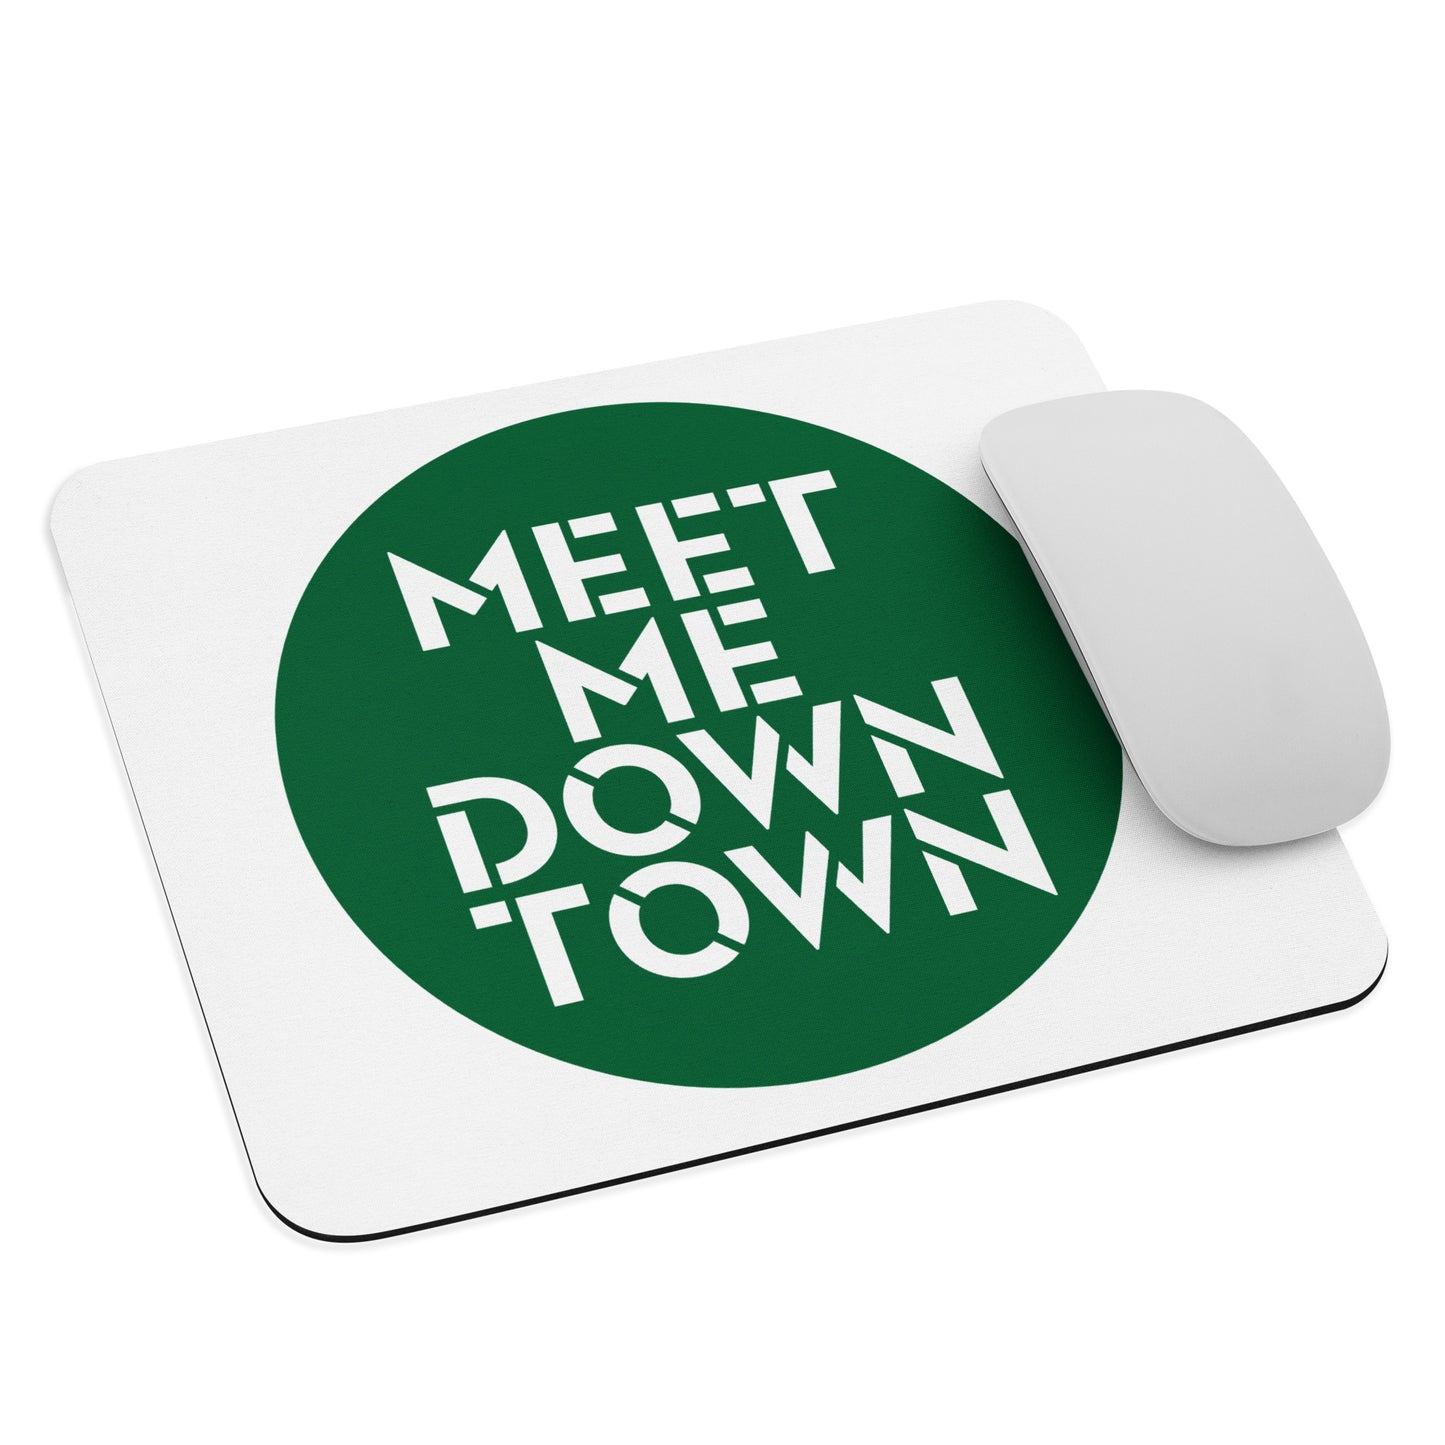 "Meet Me Downtown" (Green) Mouse Pad